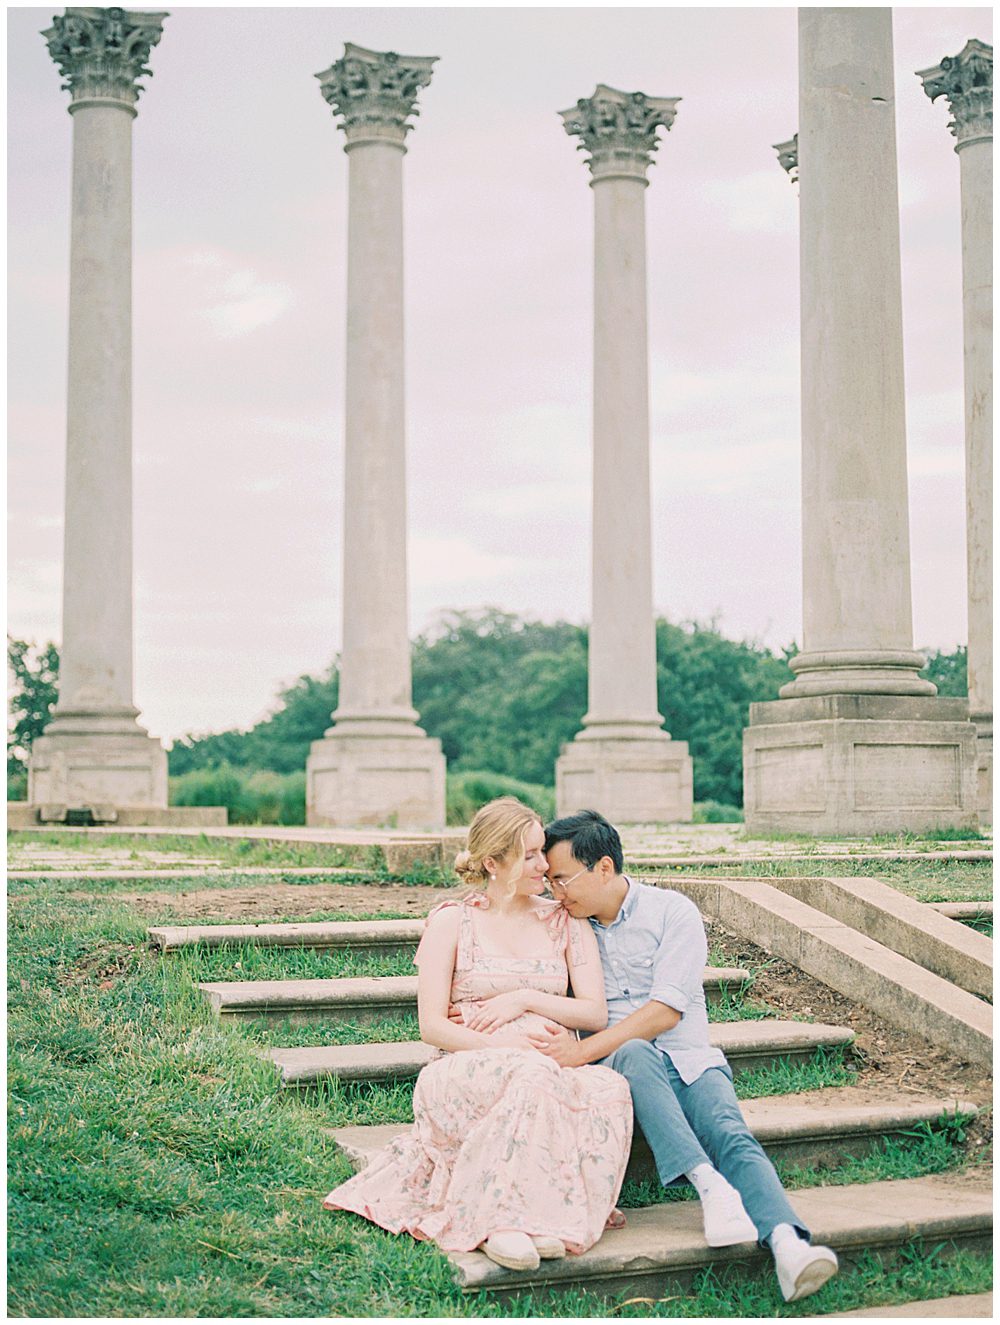 Mother and father sit on steps in front of the columns at the National Arboretum and lean into one another.